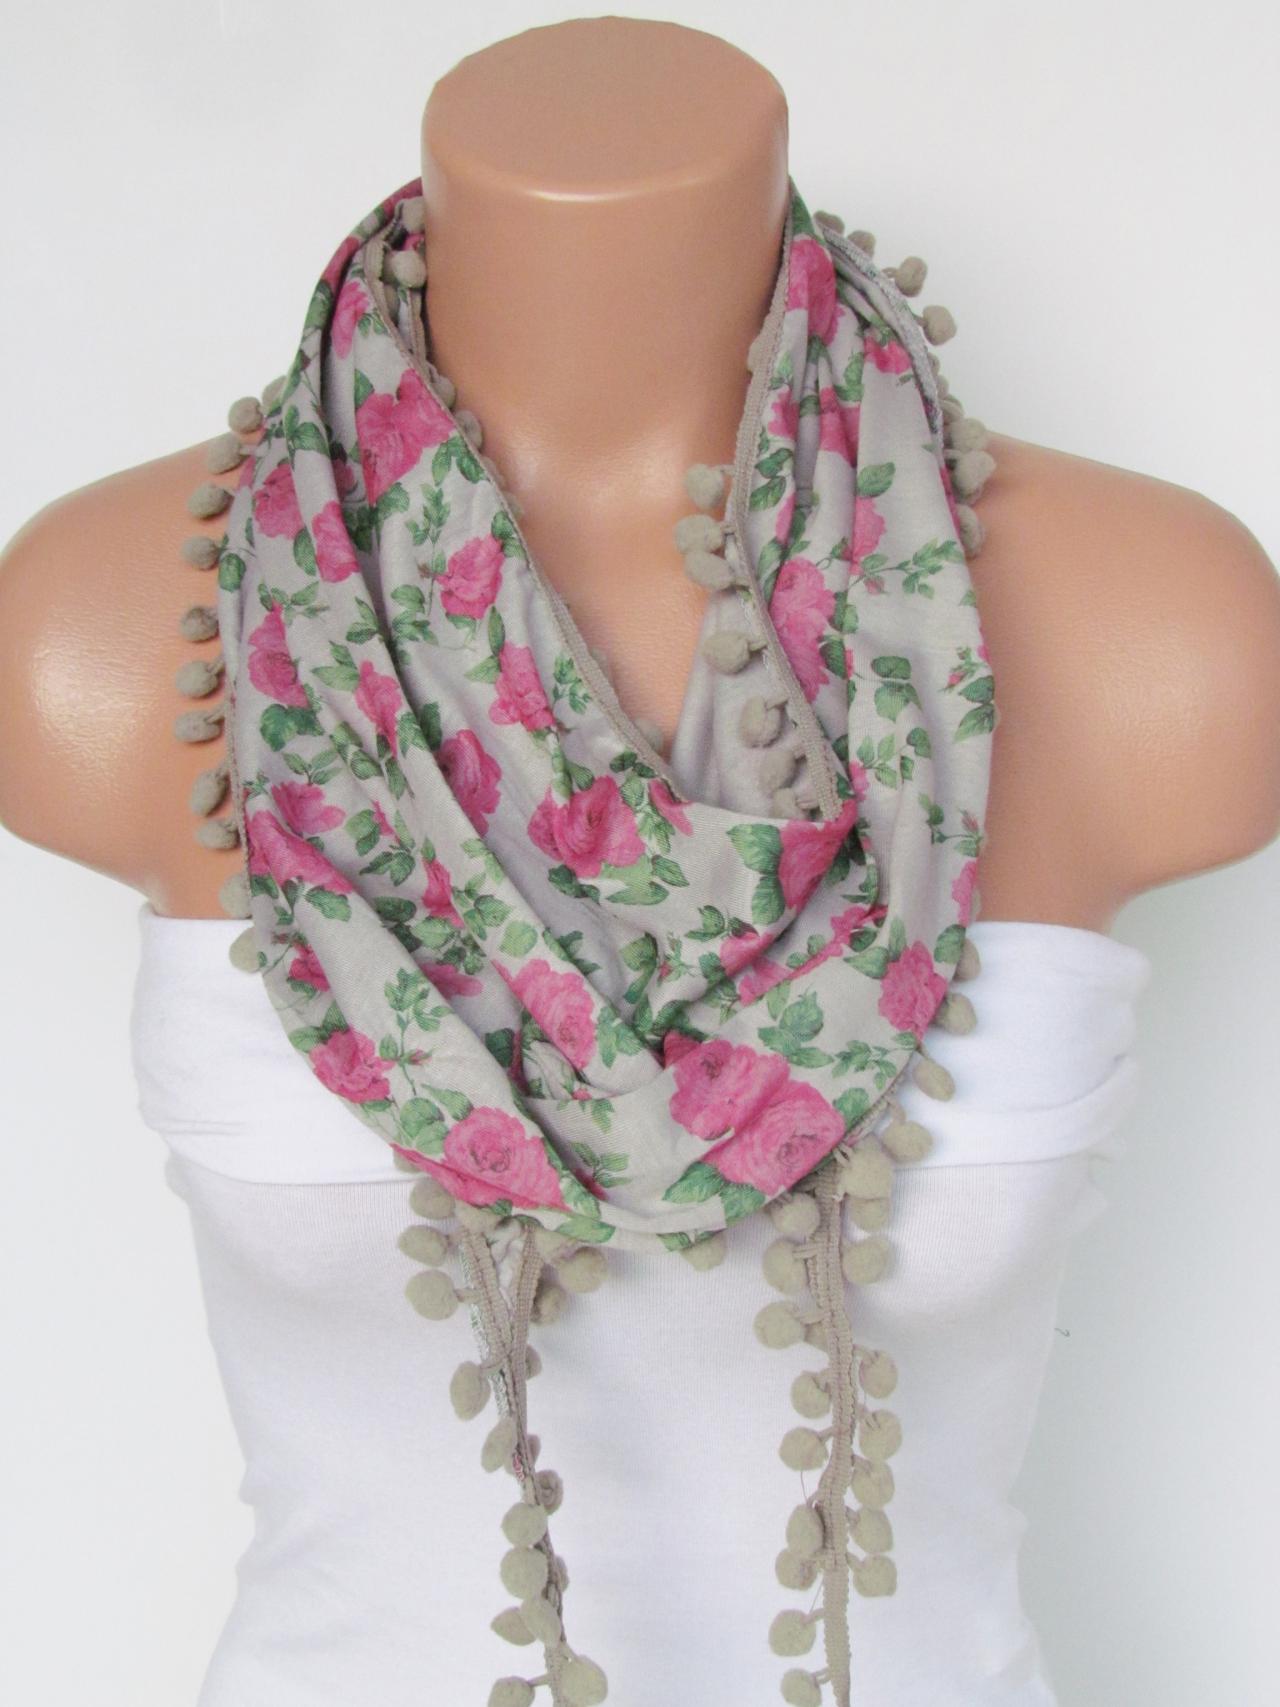 Pink Floral Pompon Scarf -Winter Fashion Scarf-Shawl Scarf-Headband-Necklace- Infinity Scarf- Winter Accessory-Long Scarf